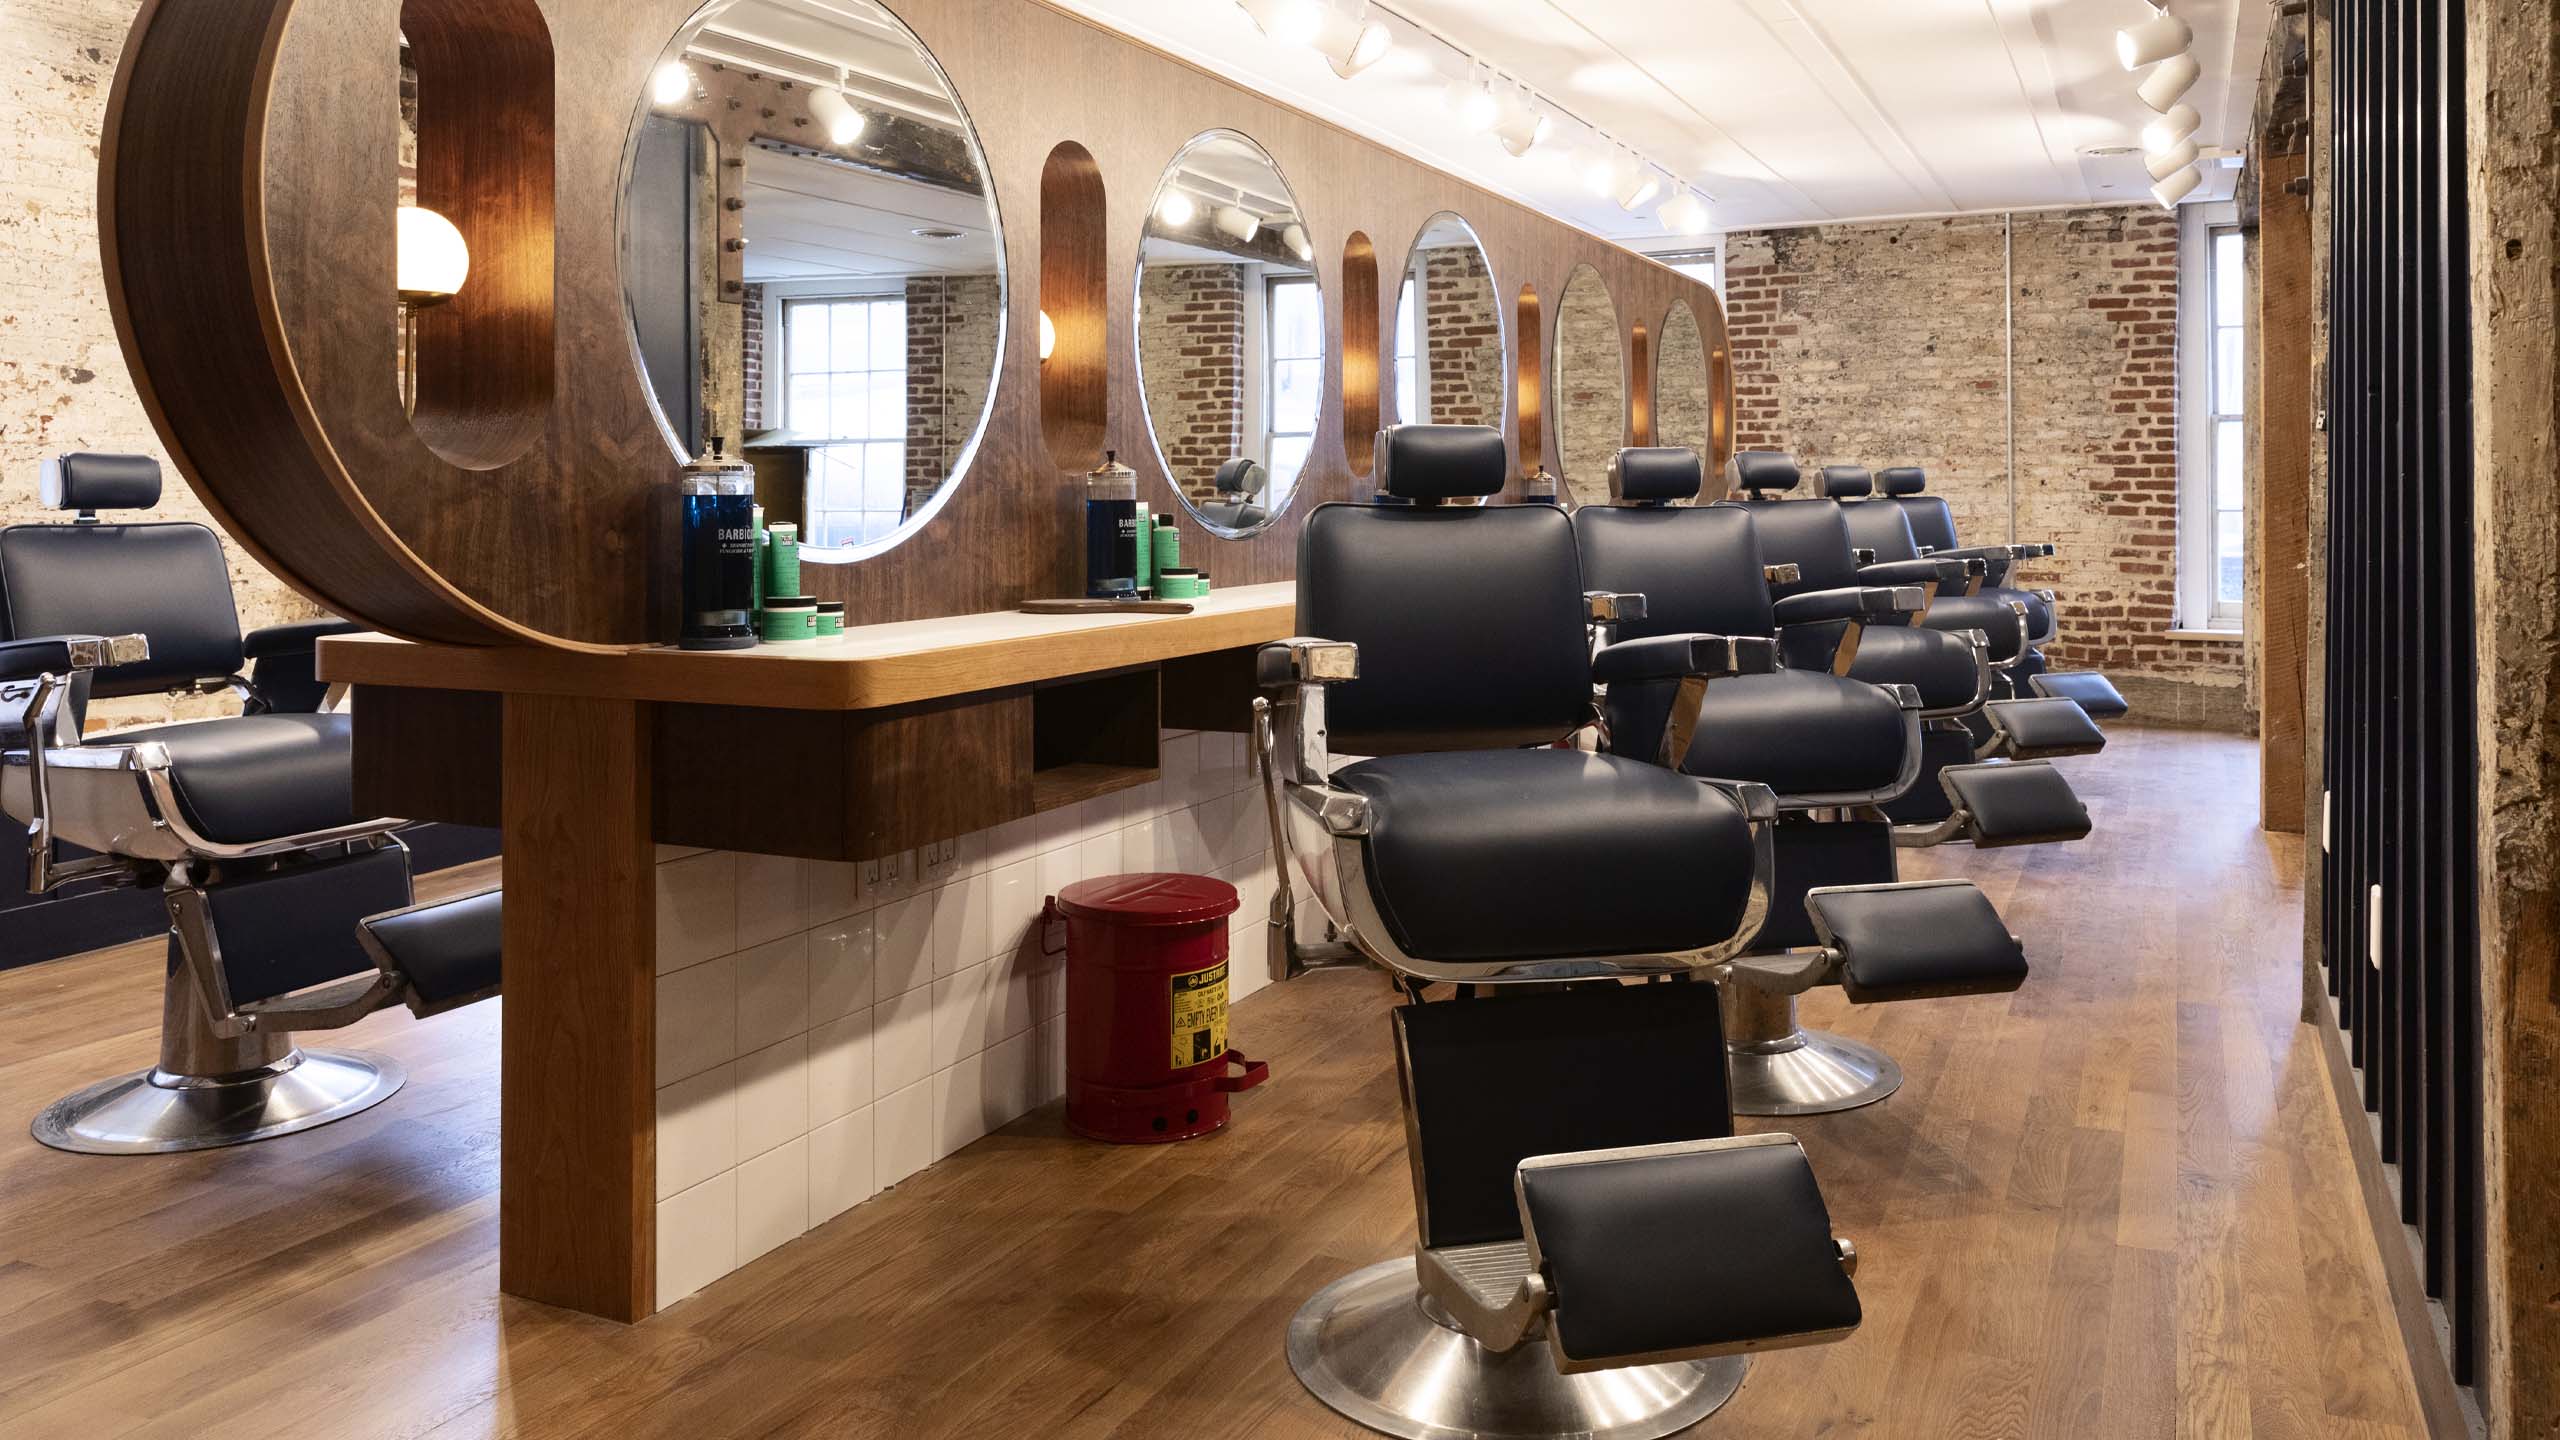 The cutting edge of the barbershop industry | Courier - Mailchimp